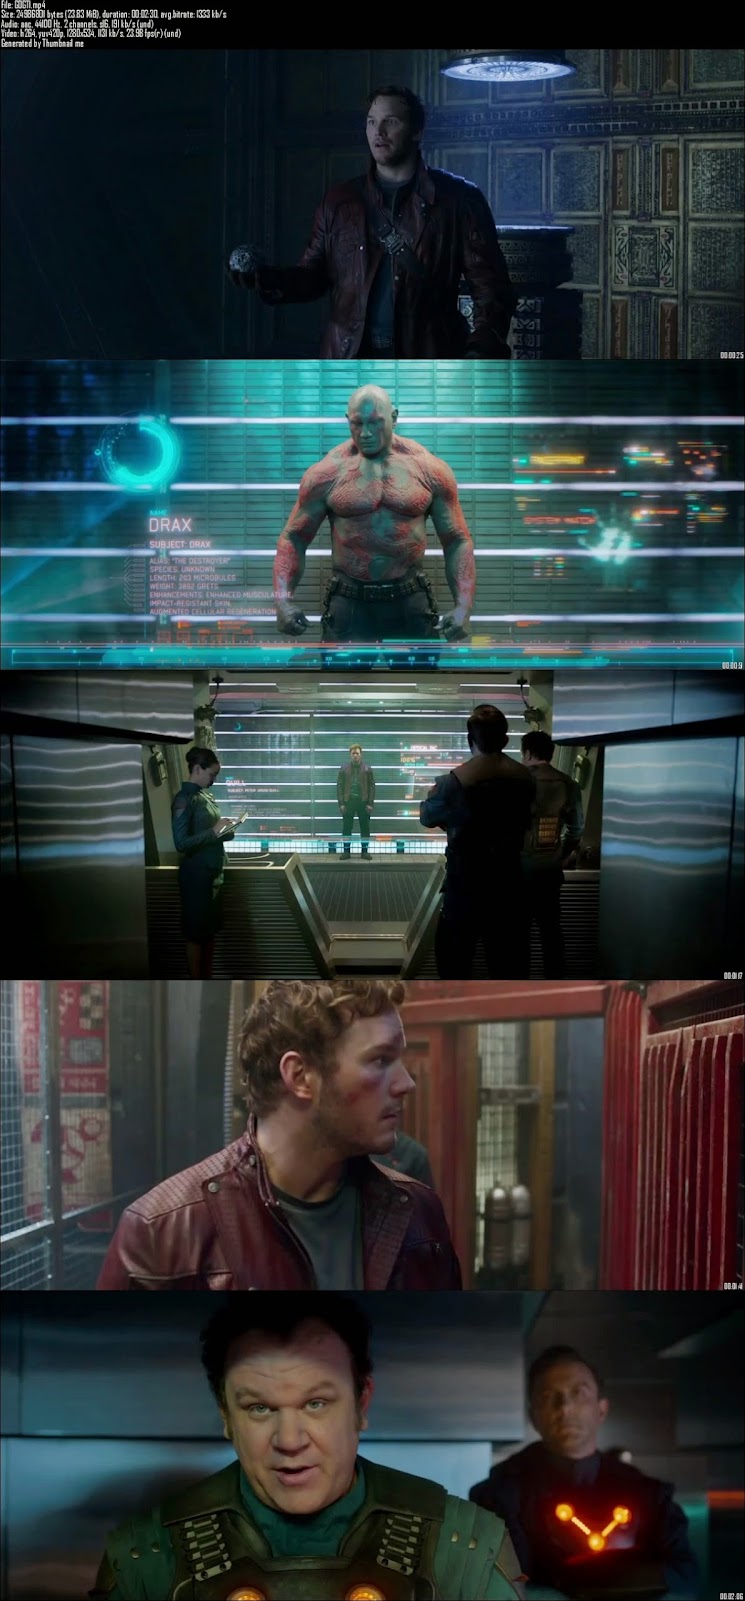 Mediafire Resumable Download Link For Teaser Promo Of Guardians of the Galaxy (2014)